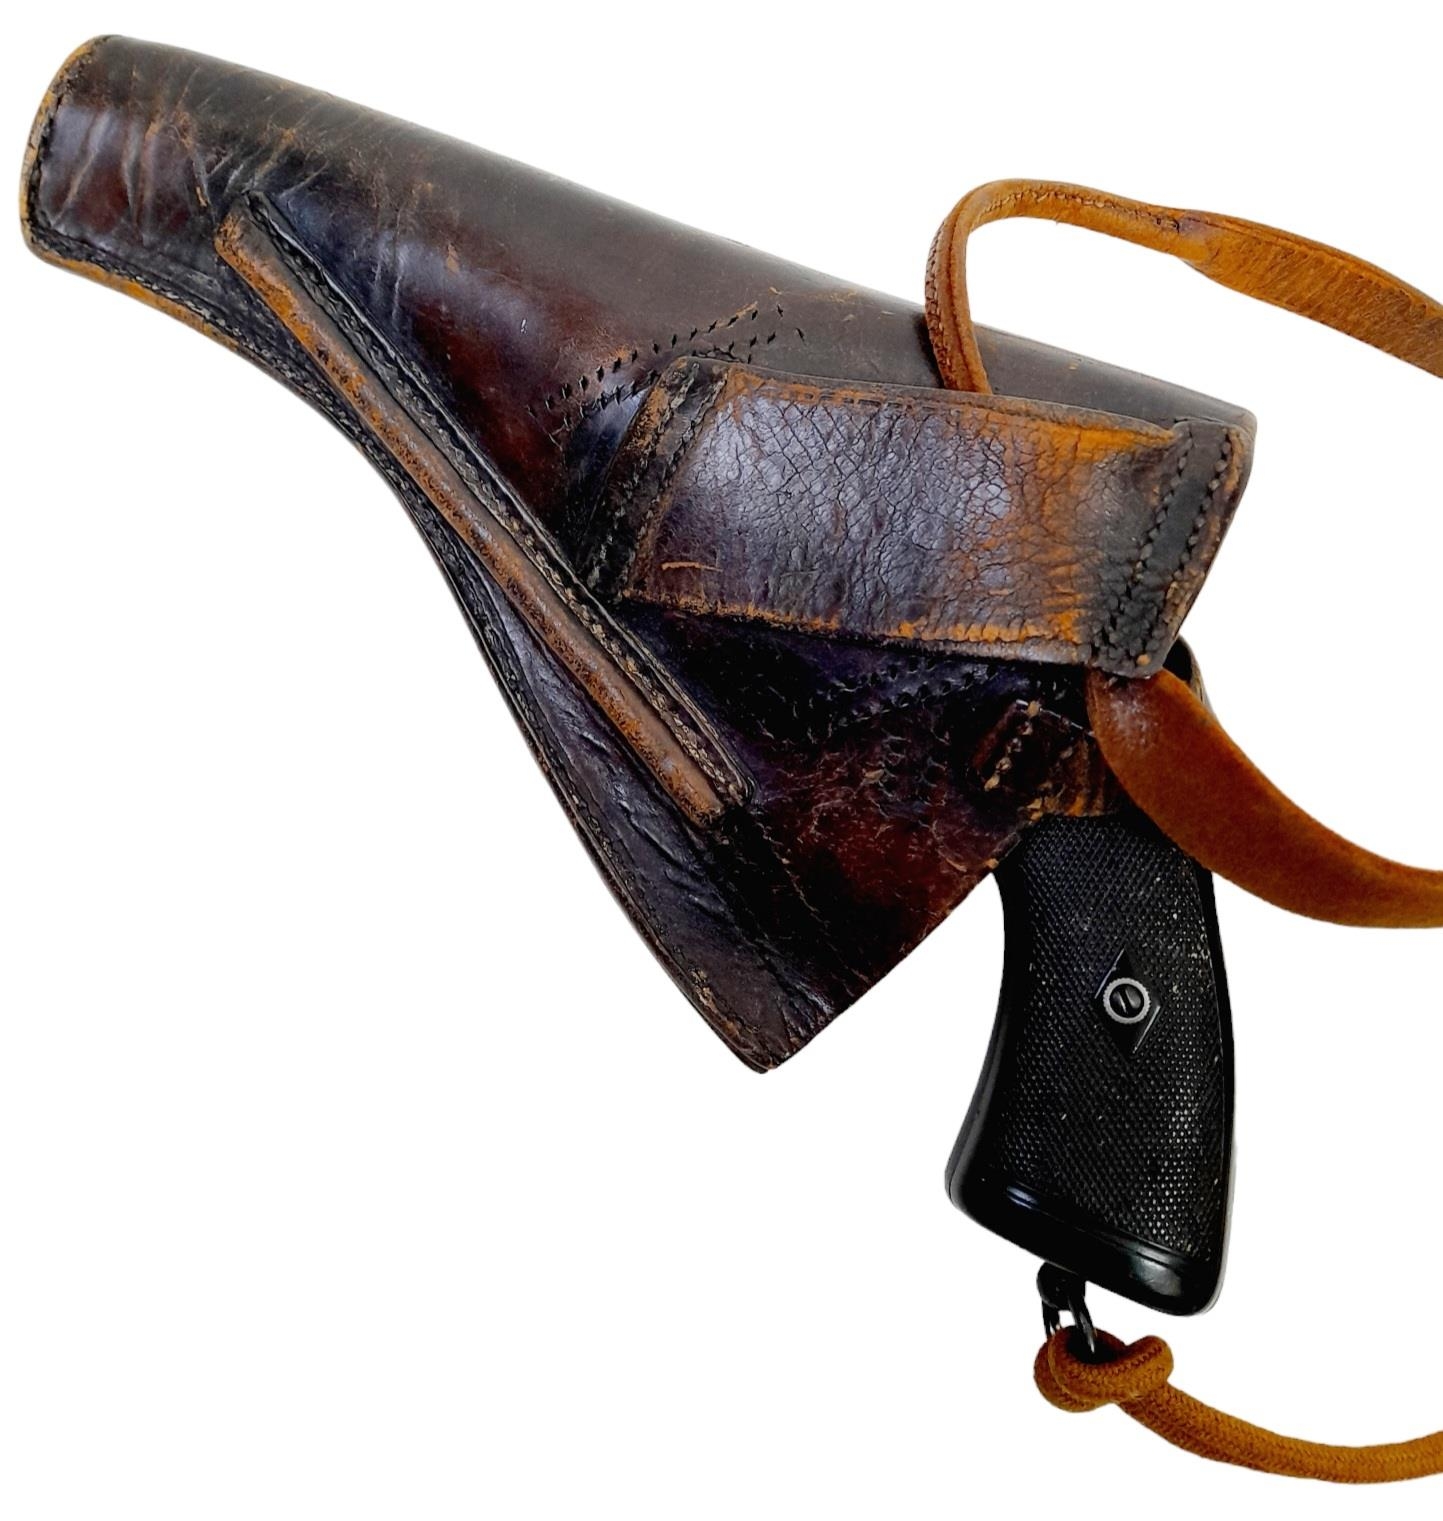 A Deactivated Webley Mark IV Revolver with Leather Holster. The British army adopted the mark IV - Image 4 of 7